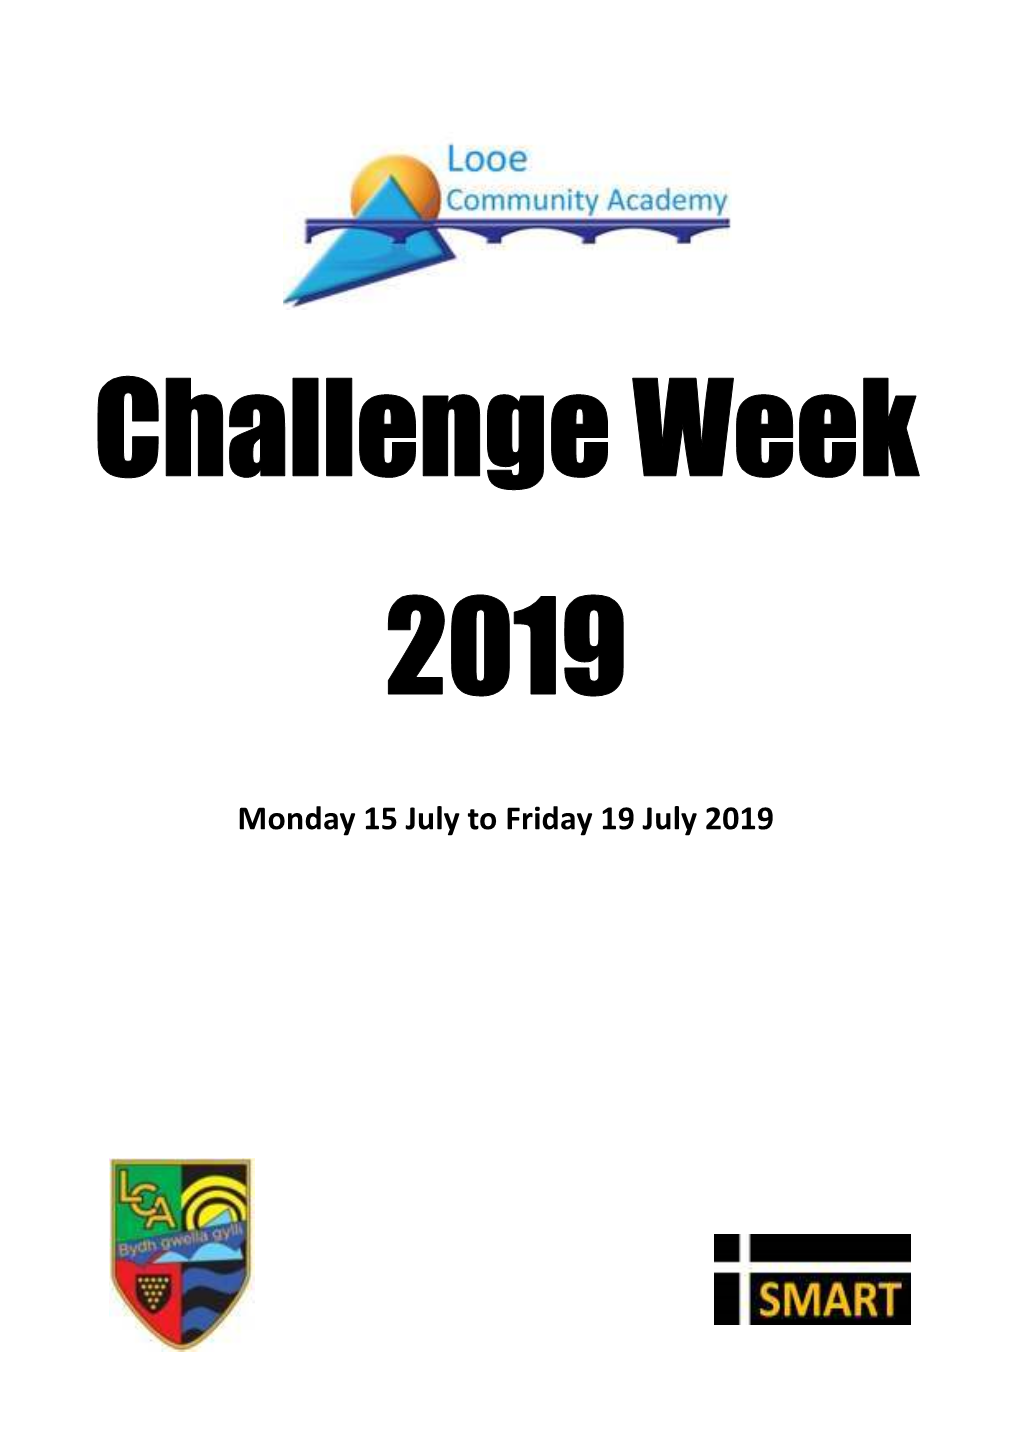 Monday 15 July to Friday 19 July 2019